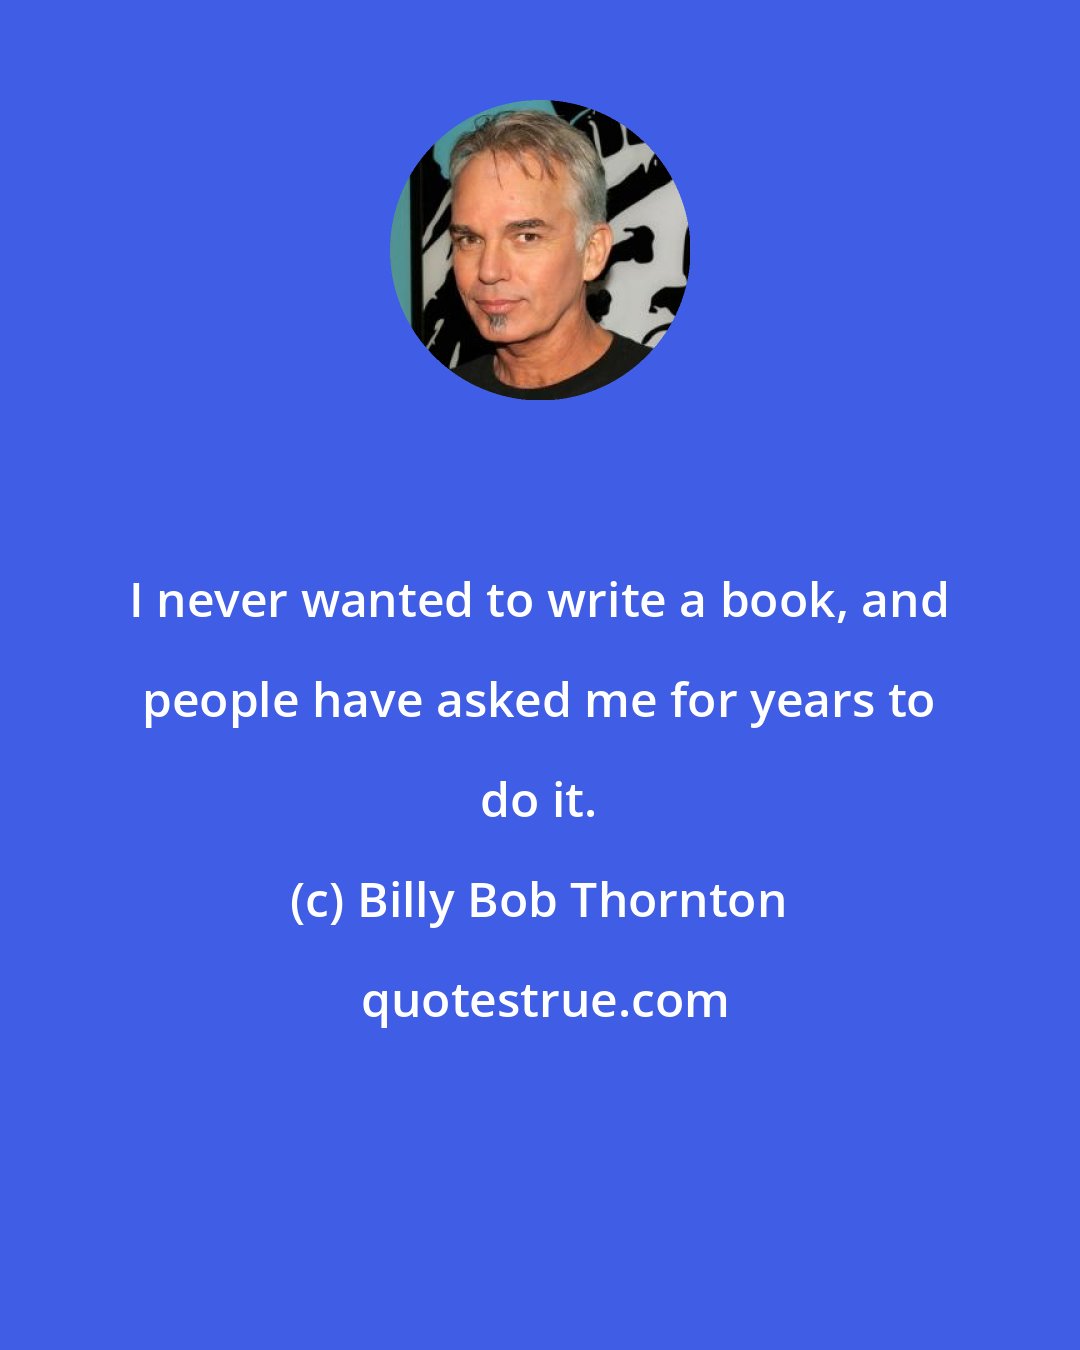 Billy Bob Thornton: I never wanted to write a book, and people have asked me for years to do it.